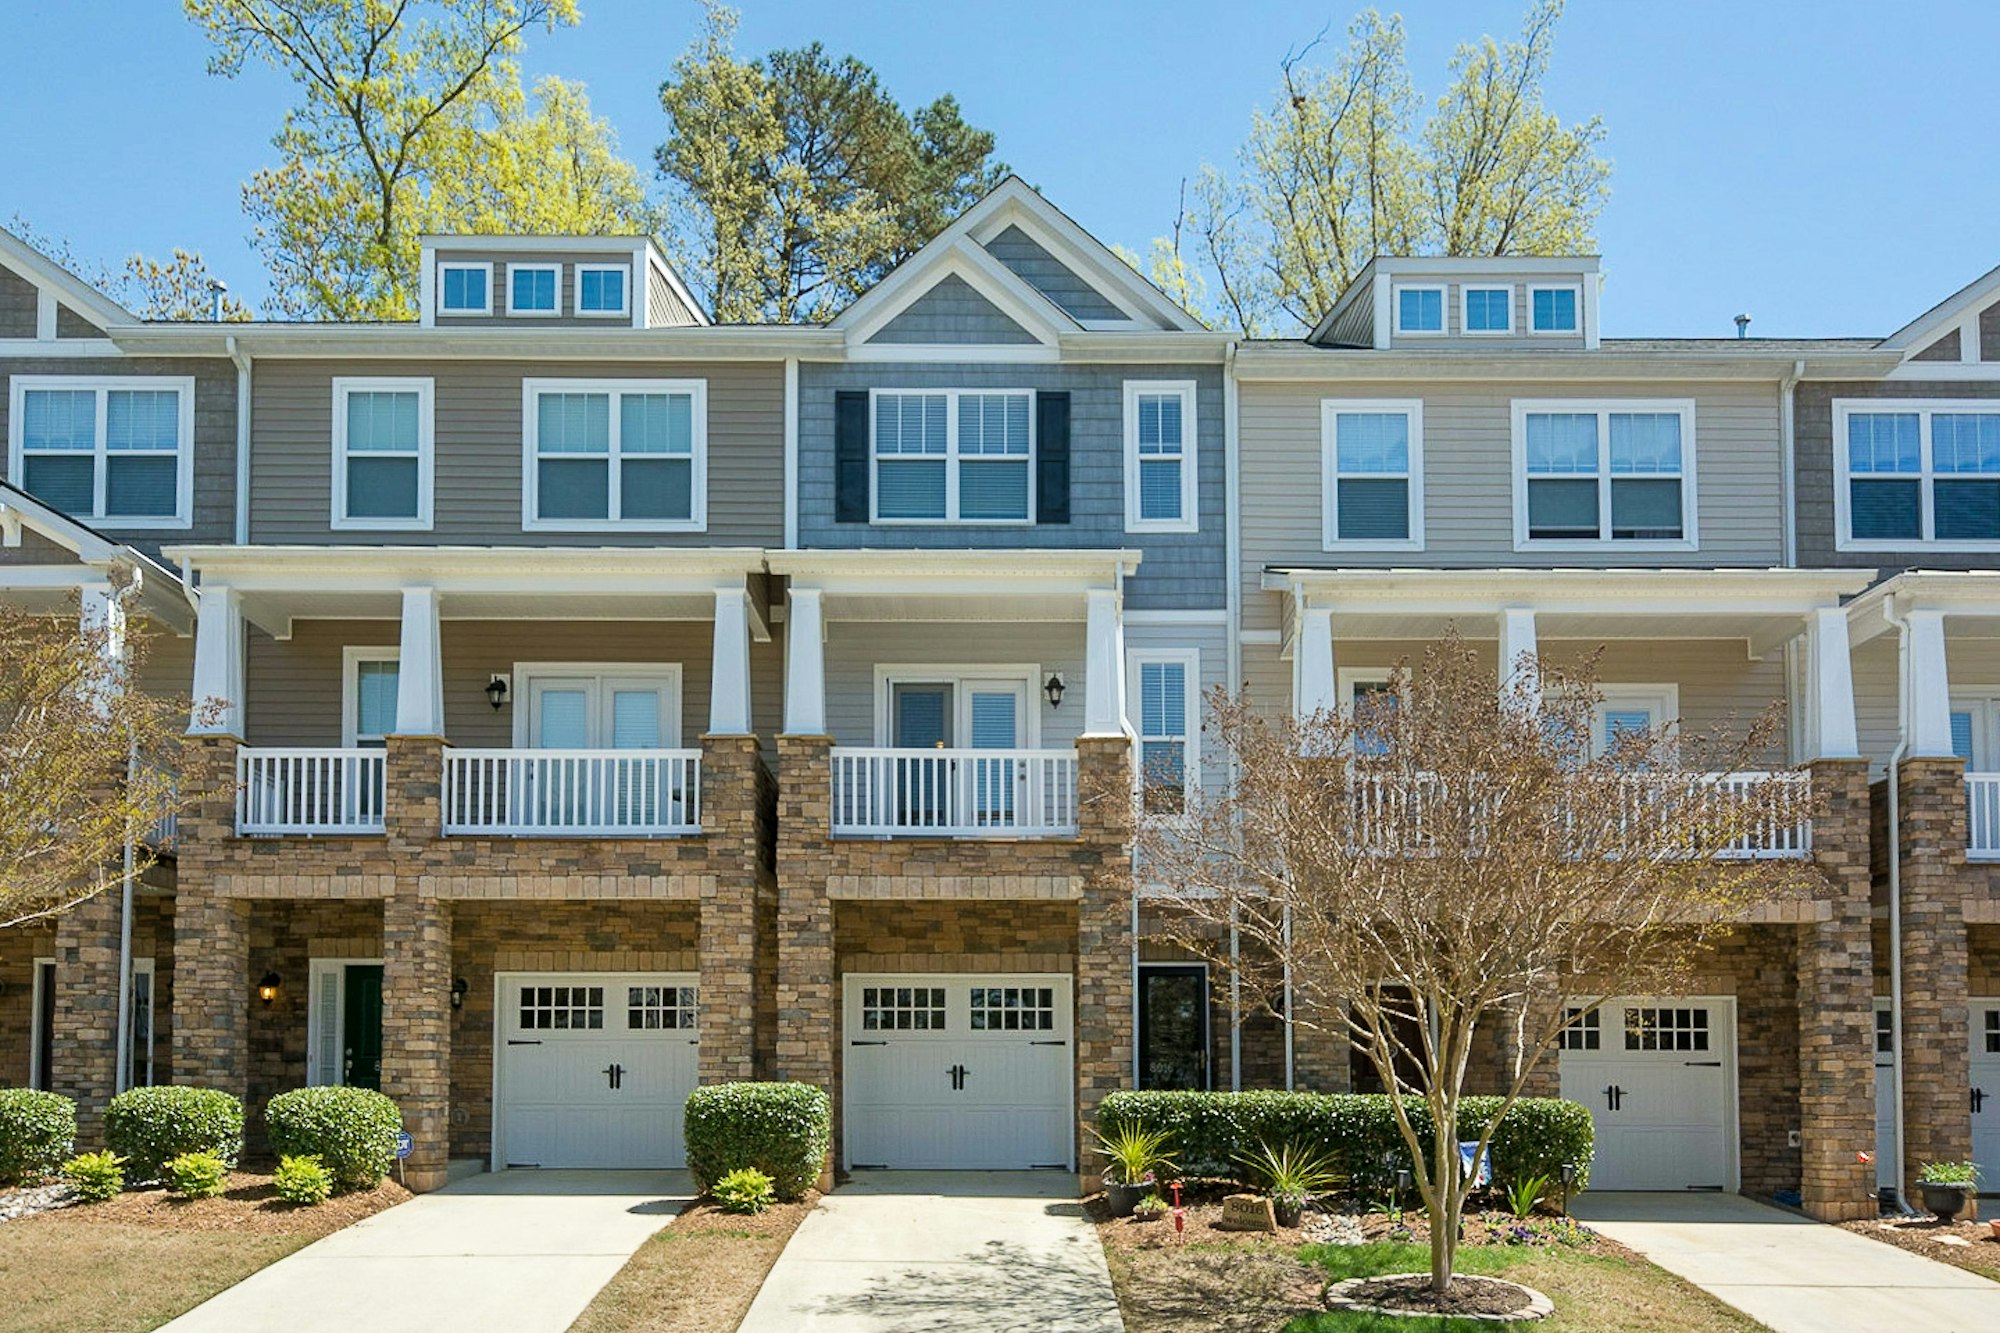 Photo 1 of 19 - 8016 Sycamore Hill Ln, Raleigh, NC 27612